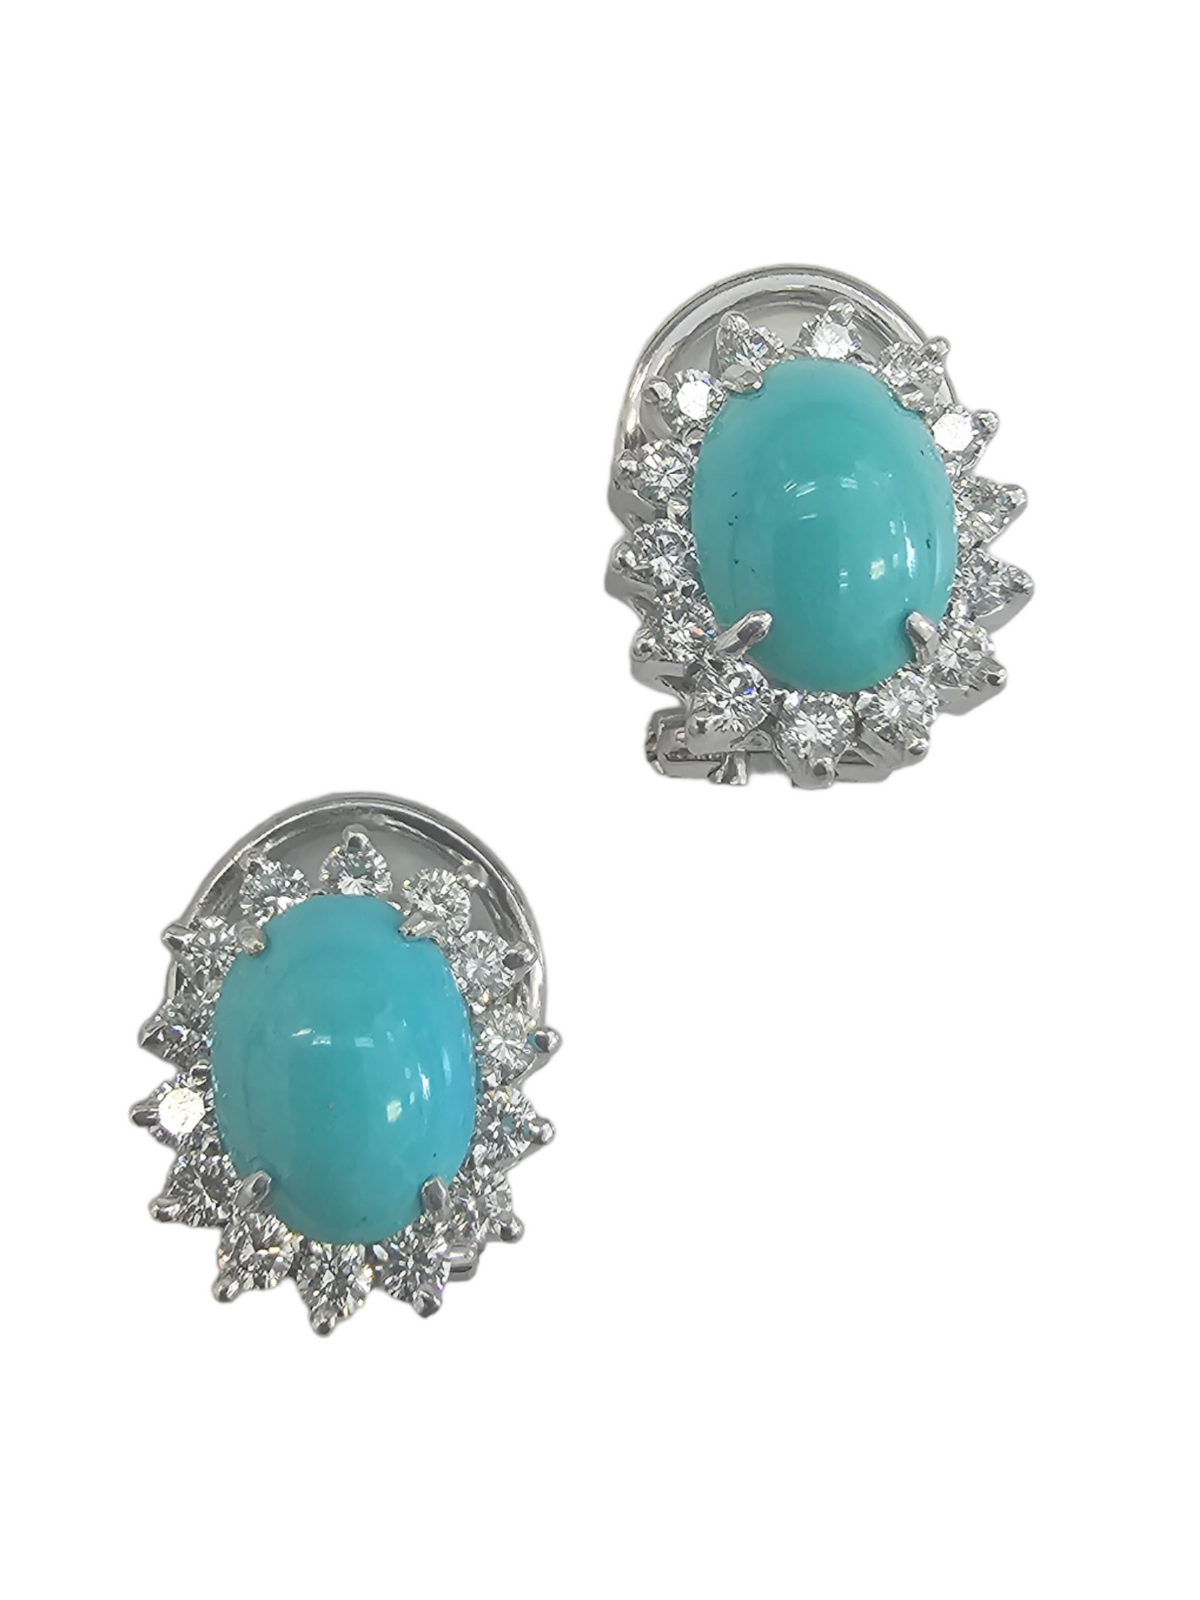 Persian Torquoise with Diamond Halo,  Clip Earrings, 18kt White Gold